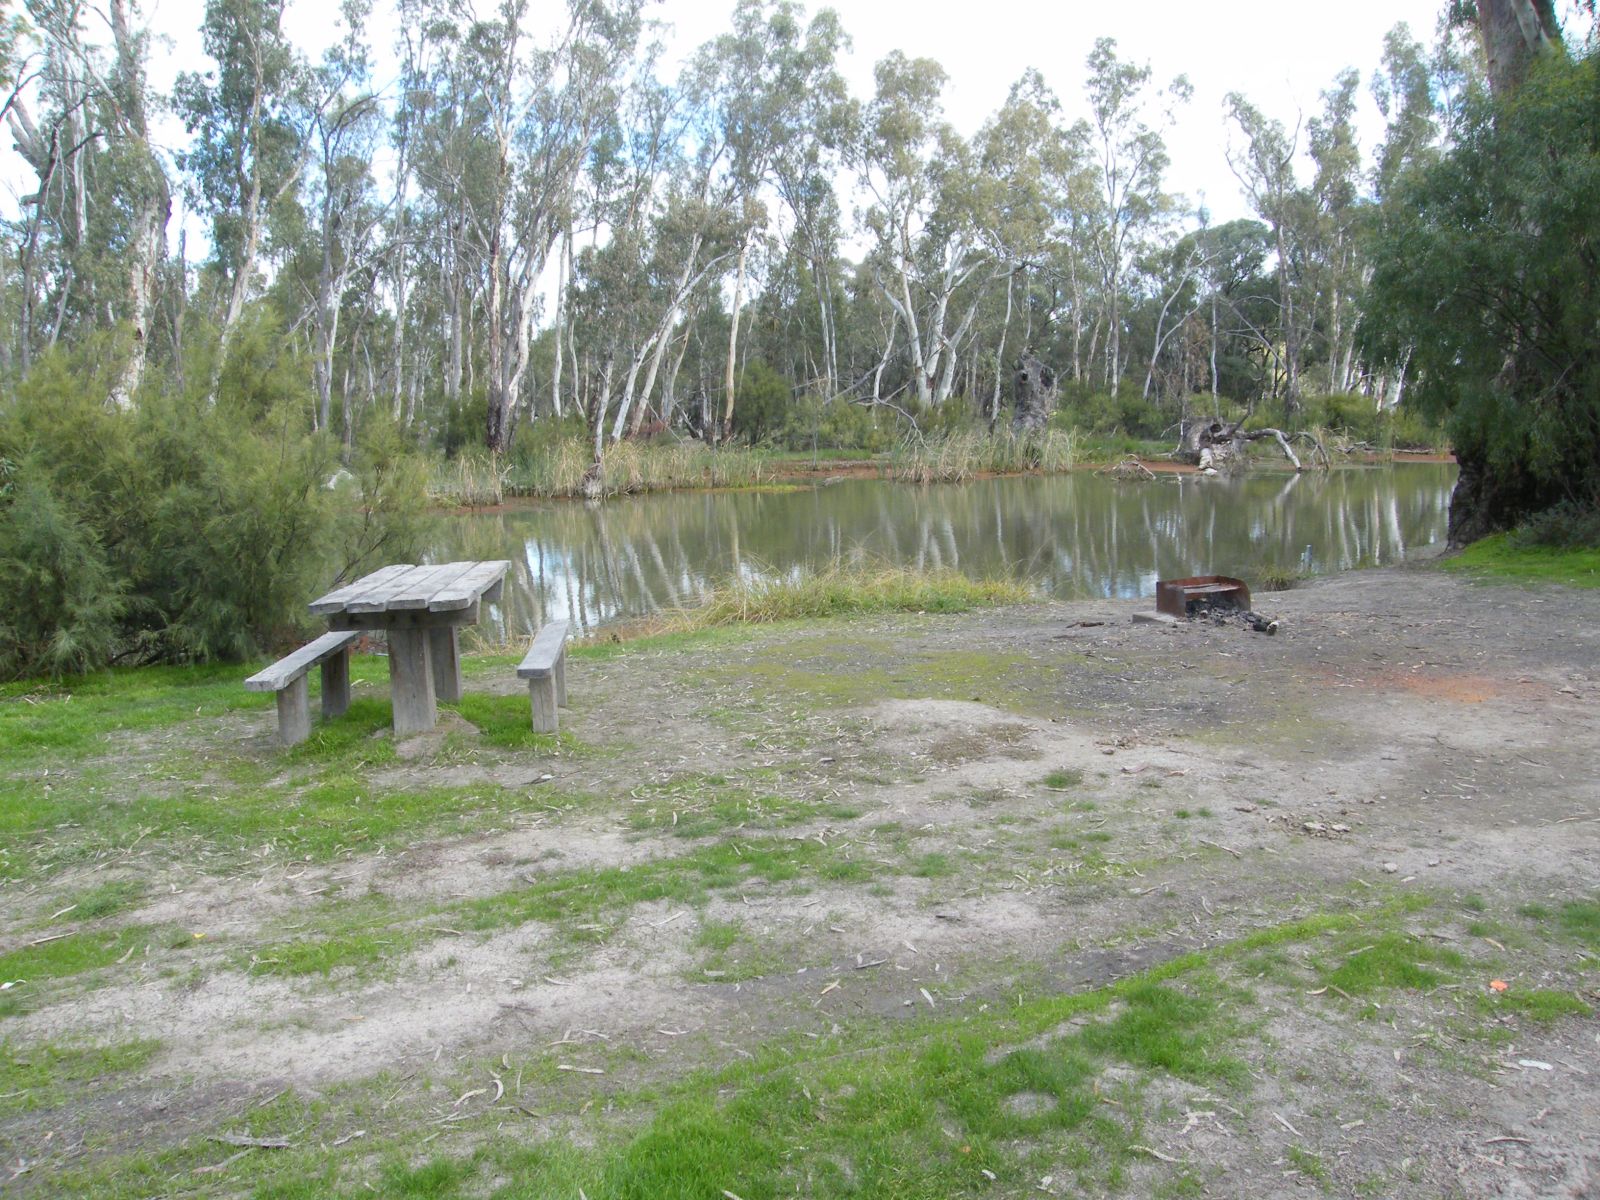 A picnic table on the banks of Gunbower Creek